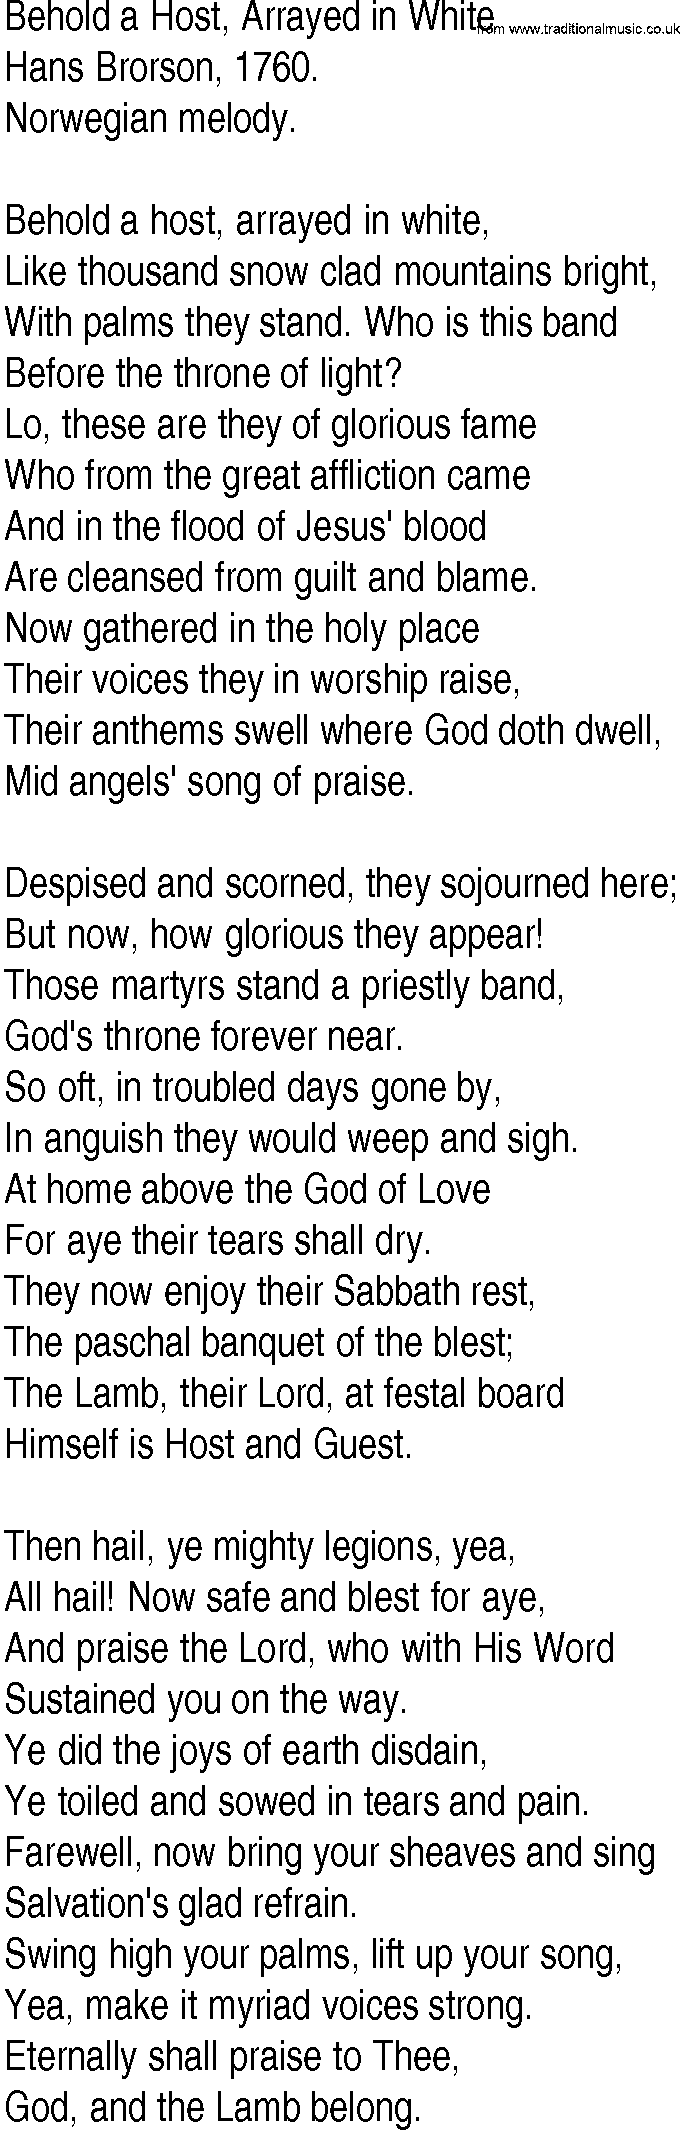 Hymn and Gospel Song: Behold a Host, Arrayed in White by Hans Brorson lyrics